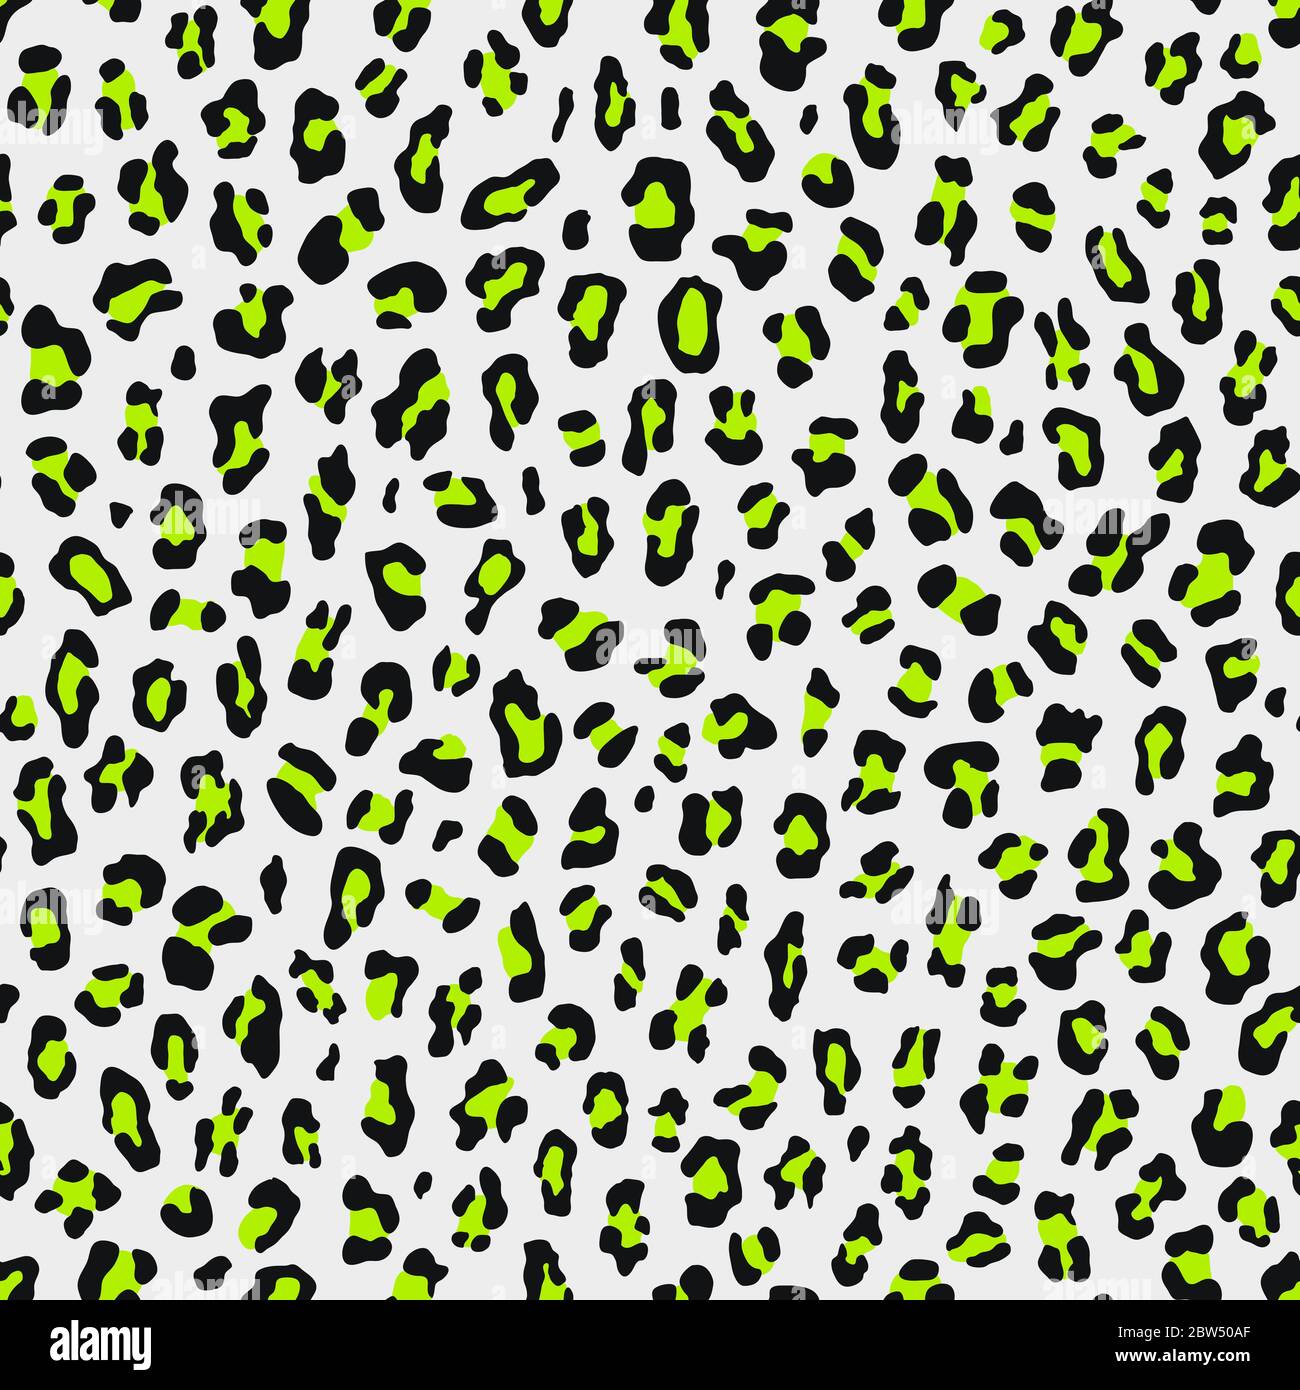 https://c8.alamy.com/comp/2BW50AF/seamless-80s-retro-style-leopard-print-with-lime-green-spots-on-white-background-vector-illustration-animal-repeat-surface-pattern-punk-rock-style-2BW50AF.jpg